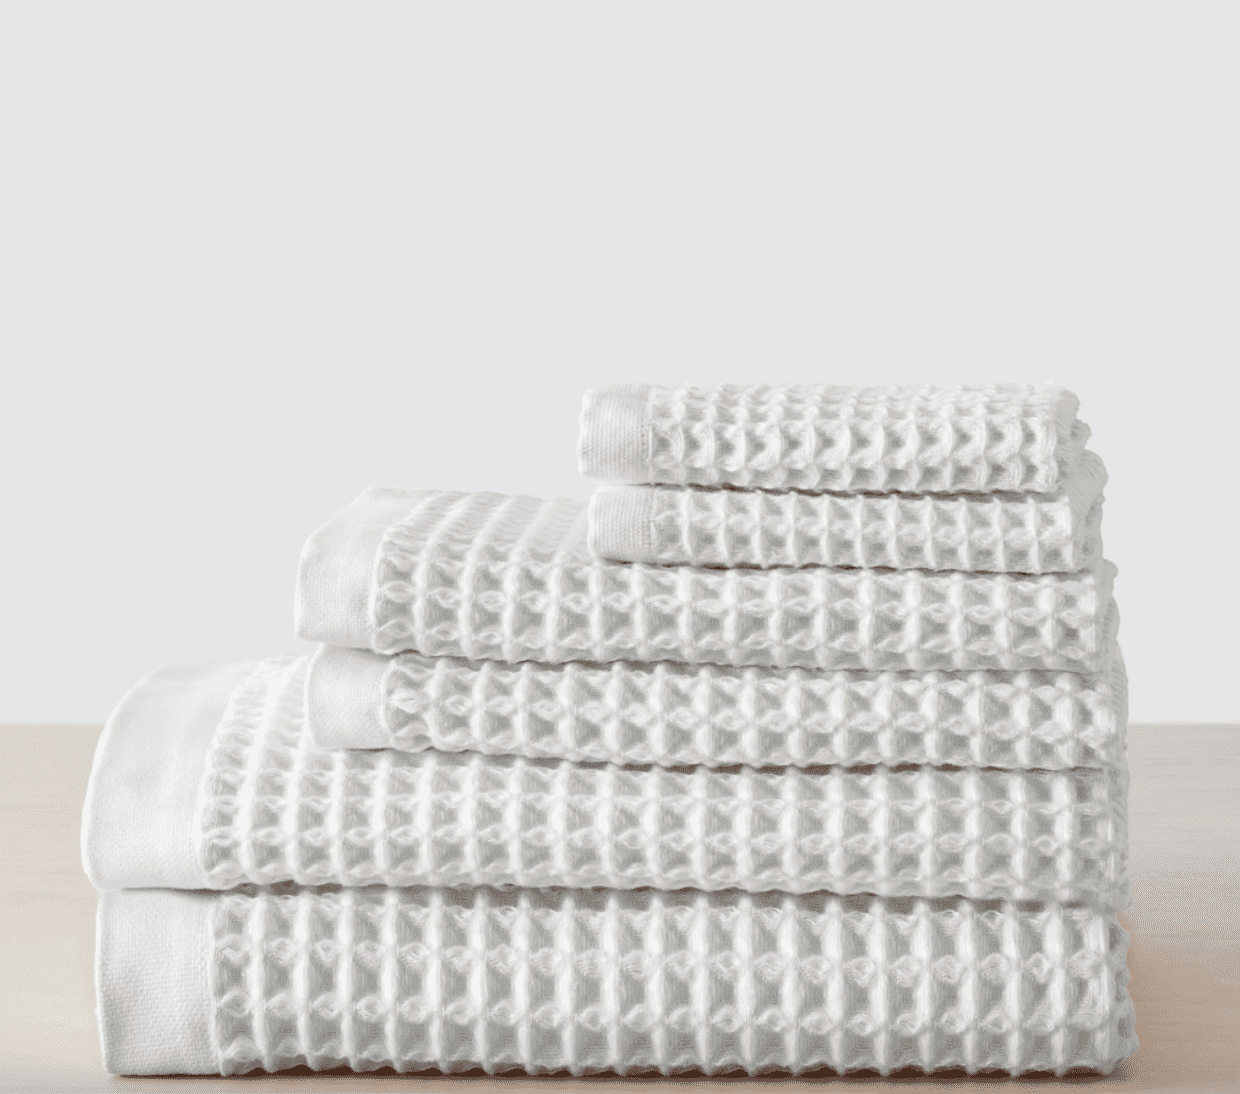 https://cdn.apartmenttherapy.info/image/upload/v1651252058/the-citizenry-towels.png